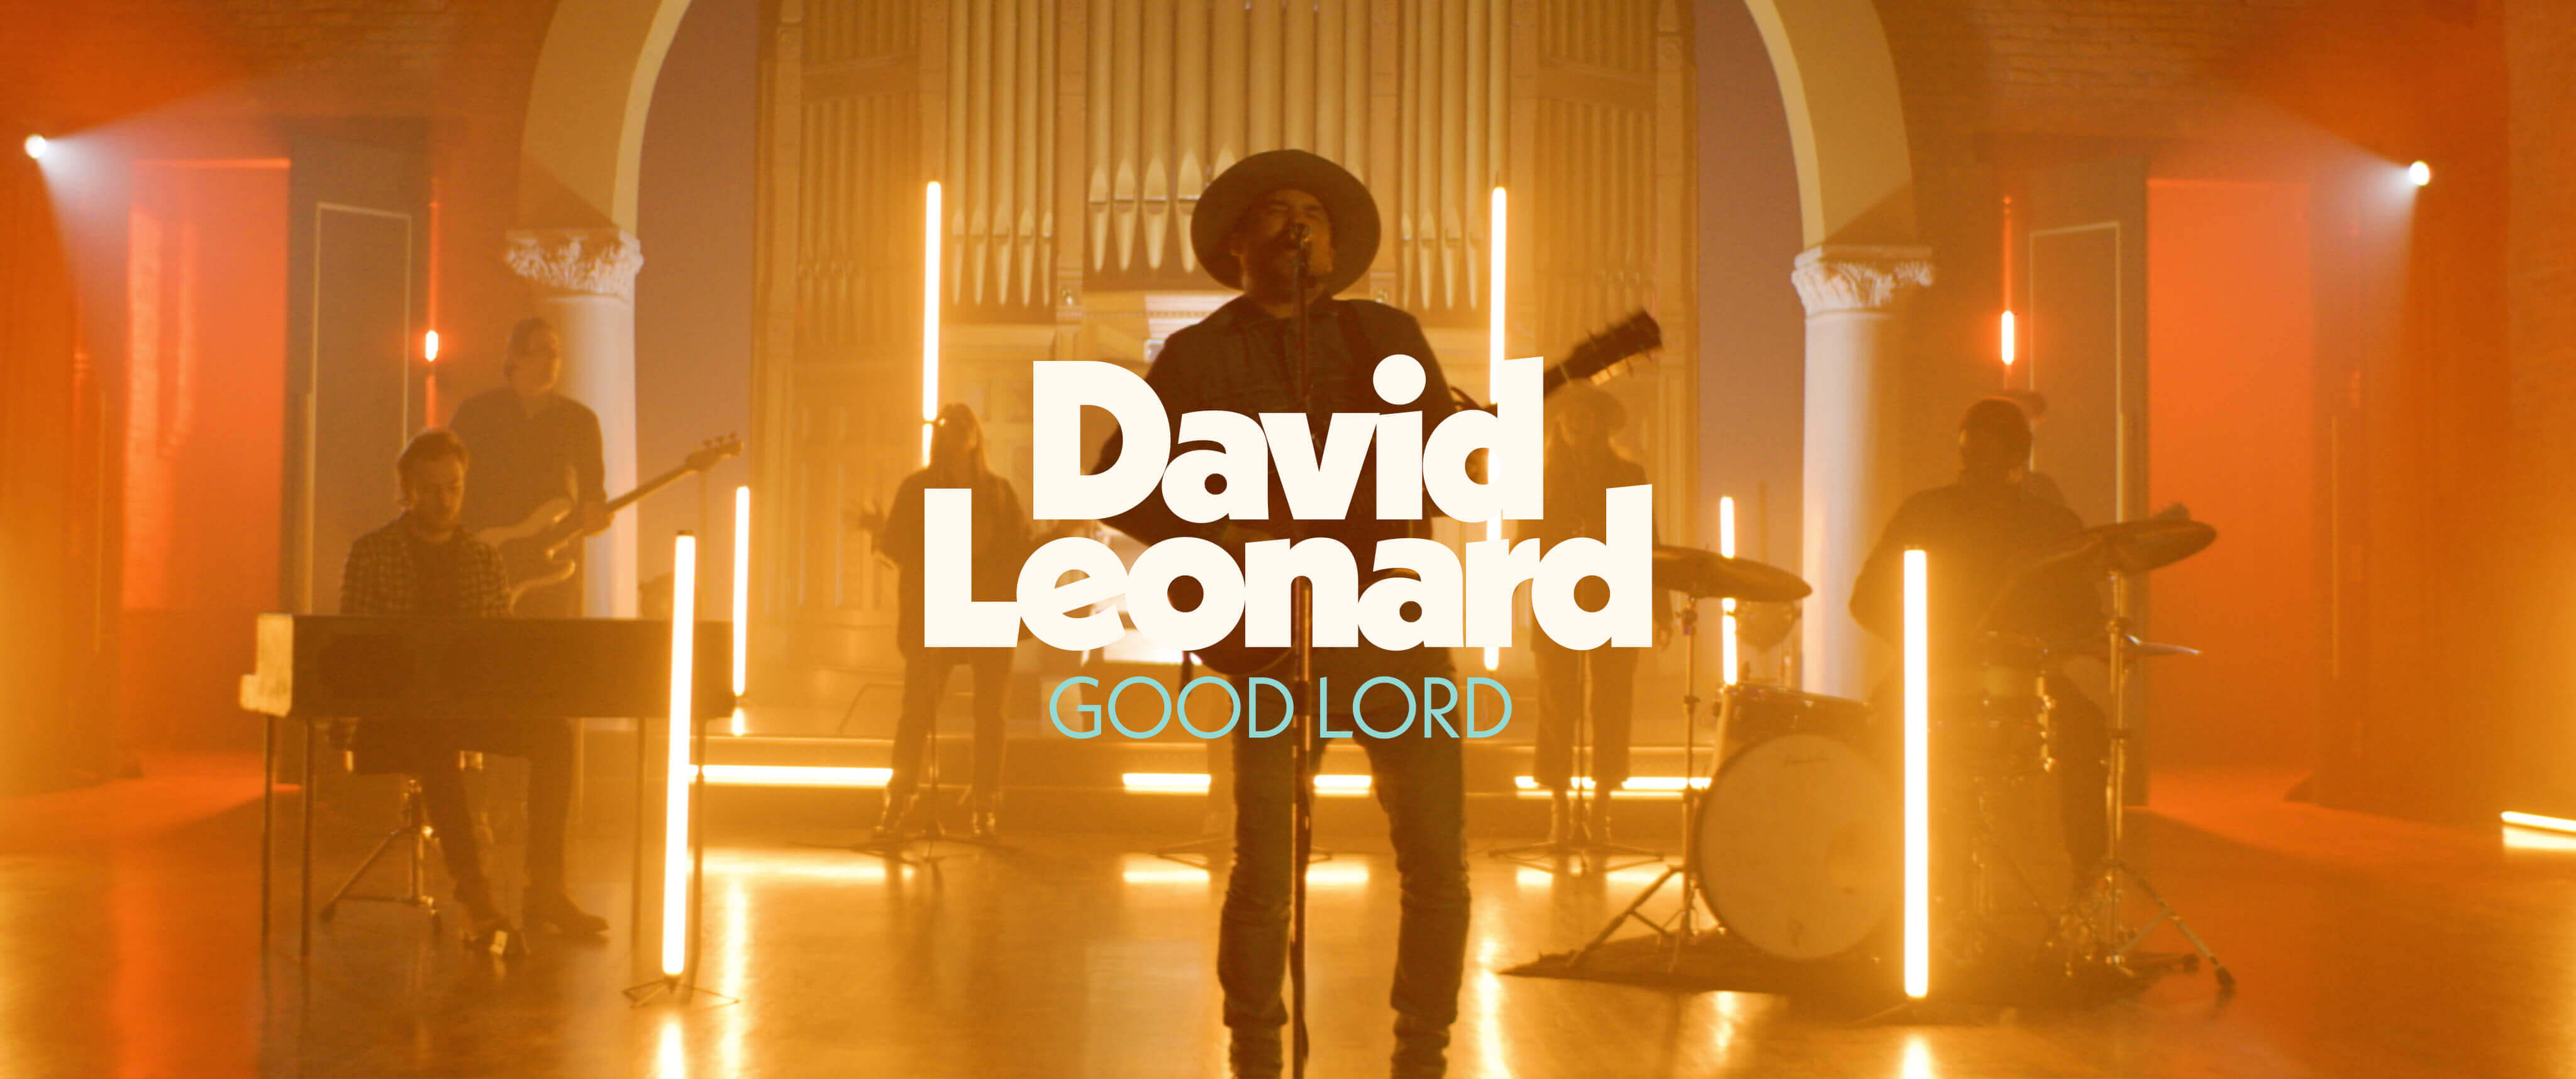 Good Lord - Music Video